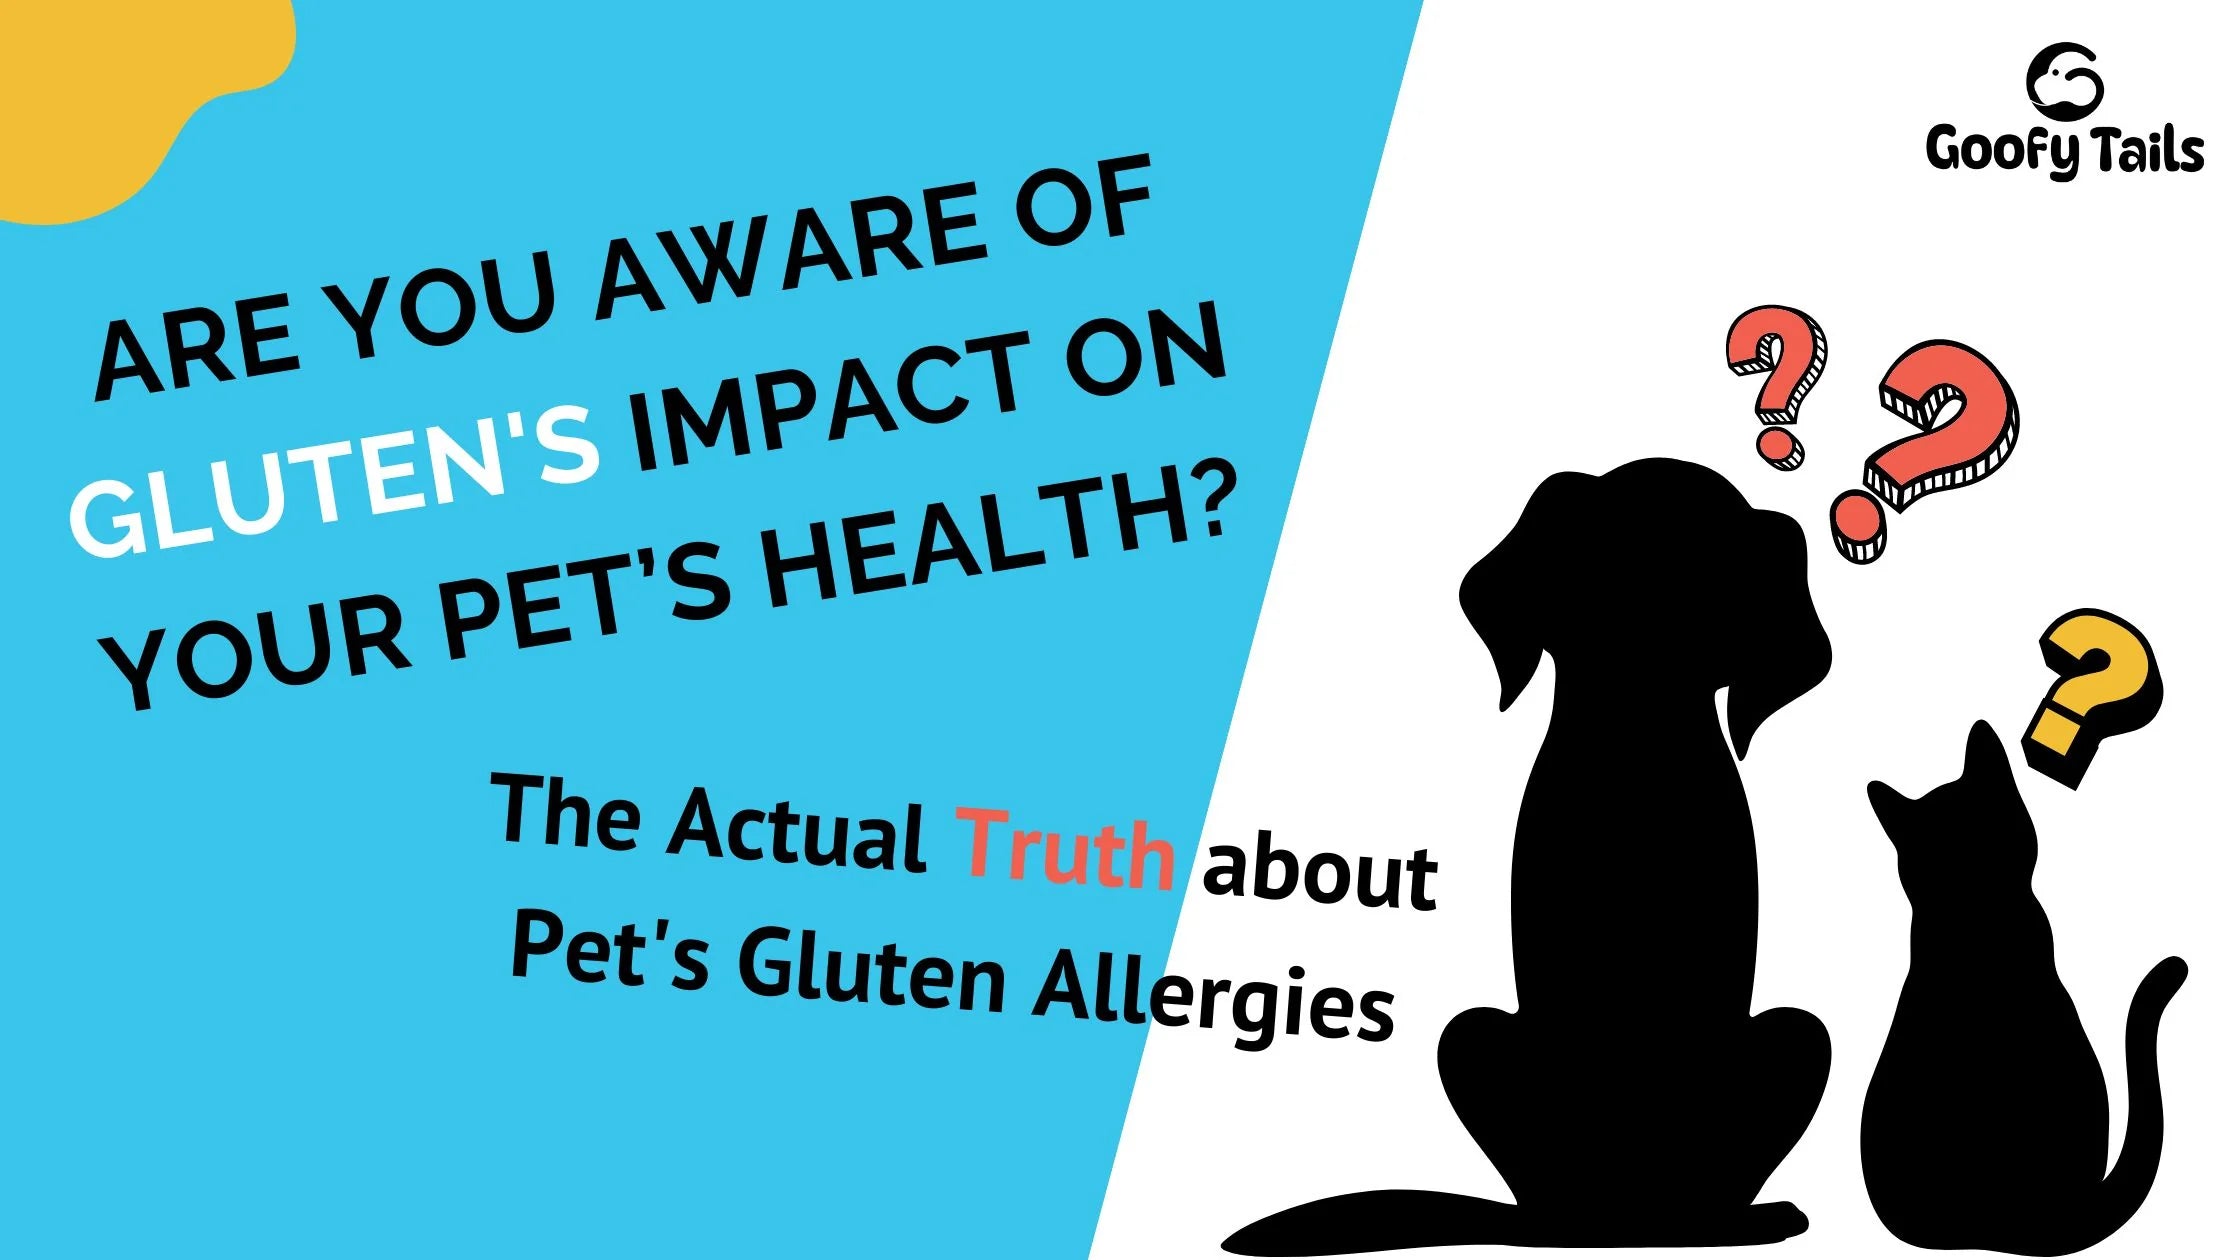 Are You Aware of Gluten's Impact on Your Pet’s health? from goofytails.com